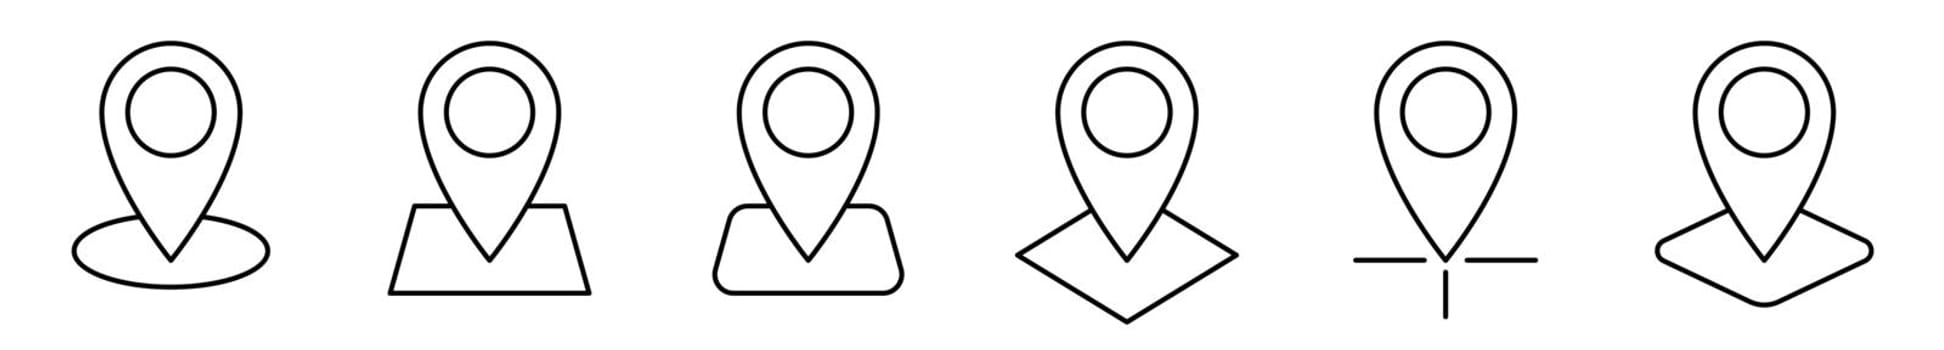 Location icons. Linear map pointer icon. Vector illustration.